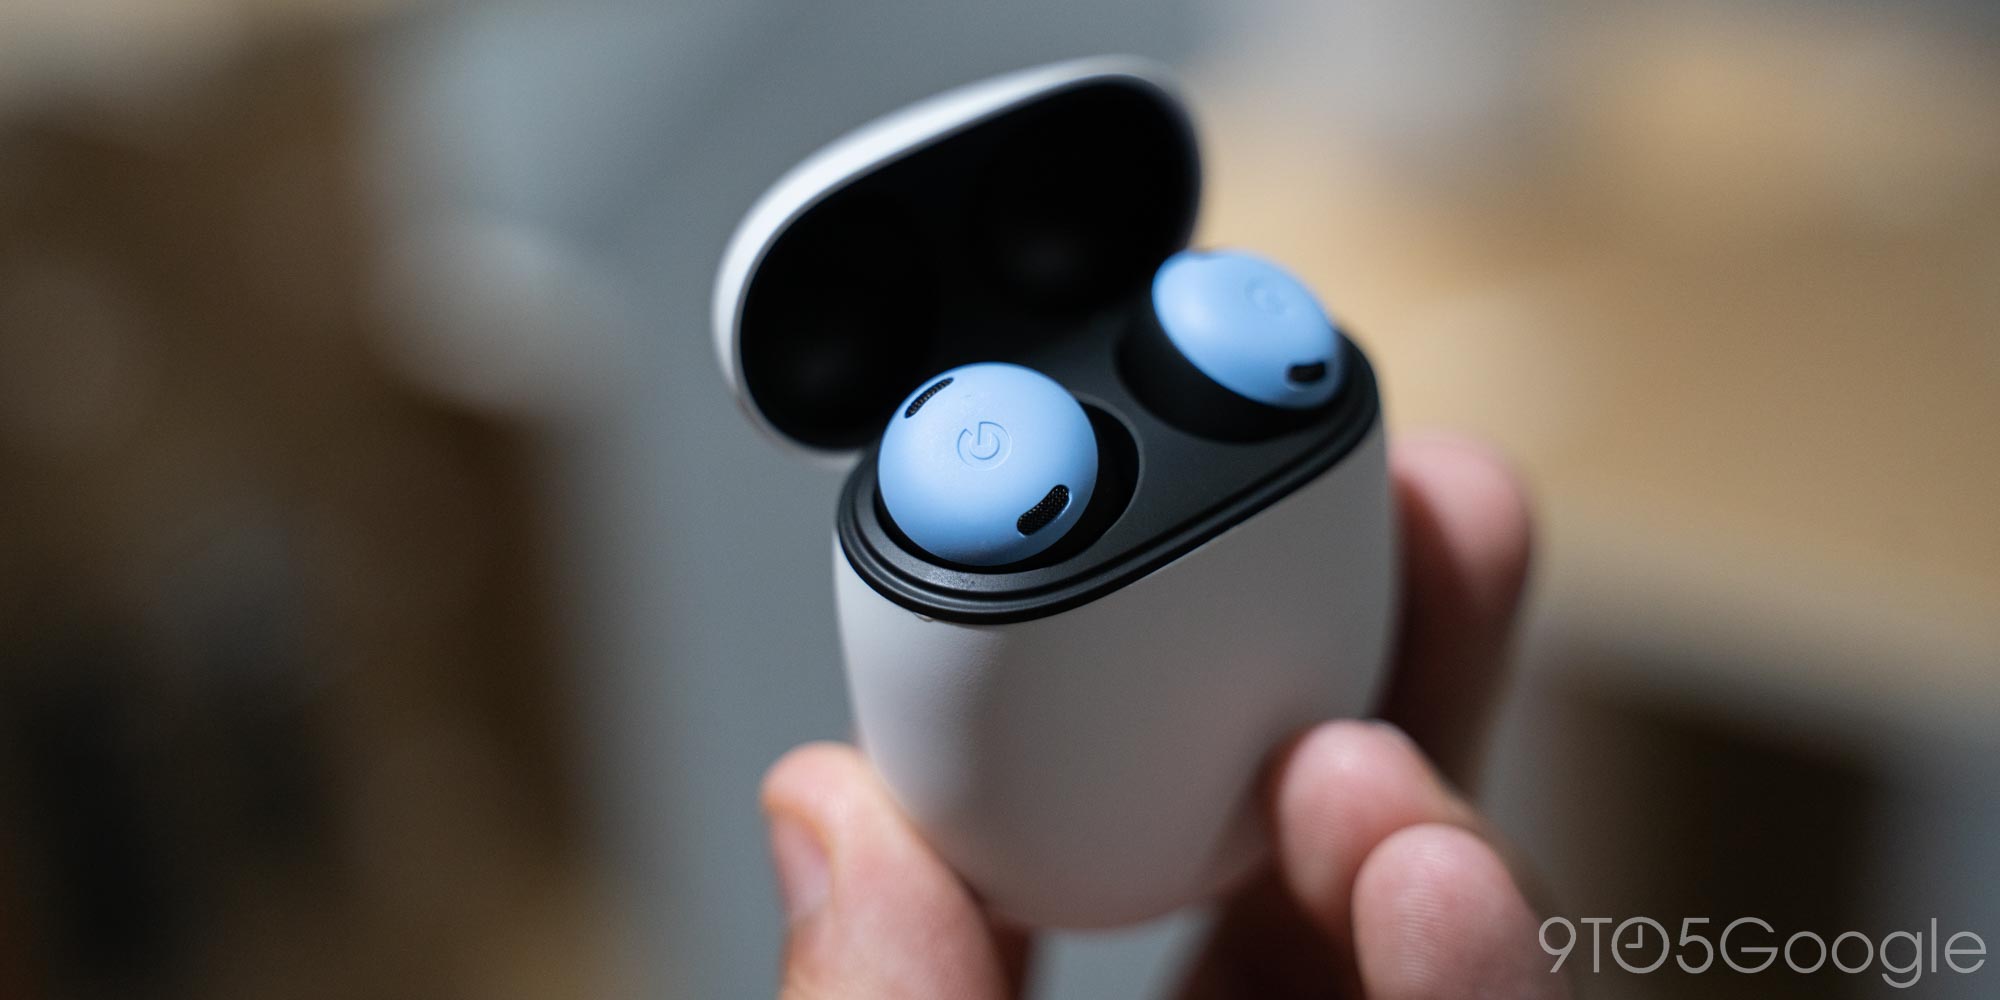 New Google Pixel Buds are here